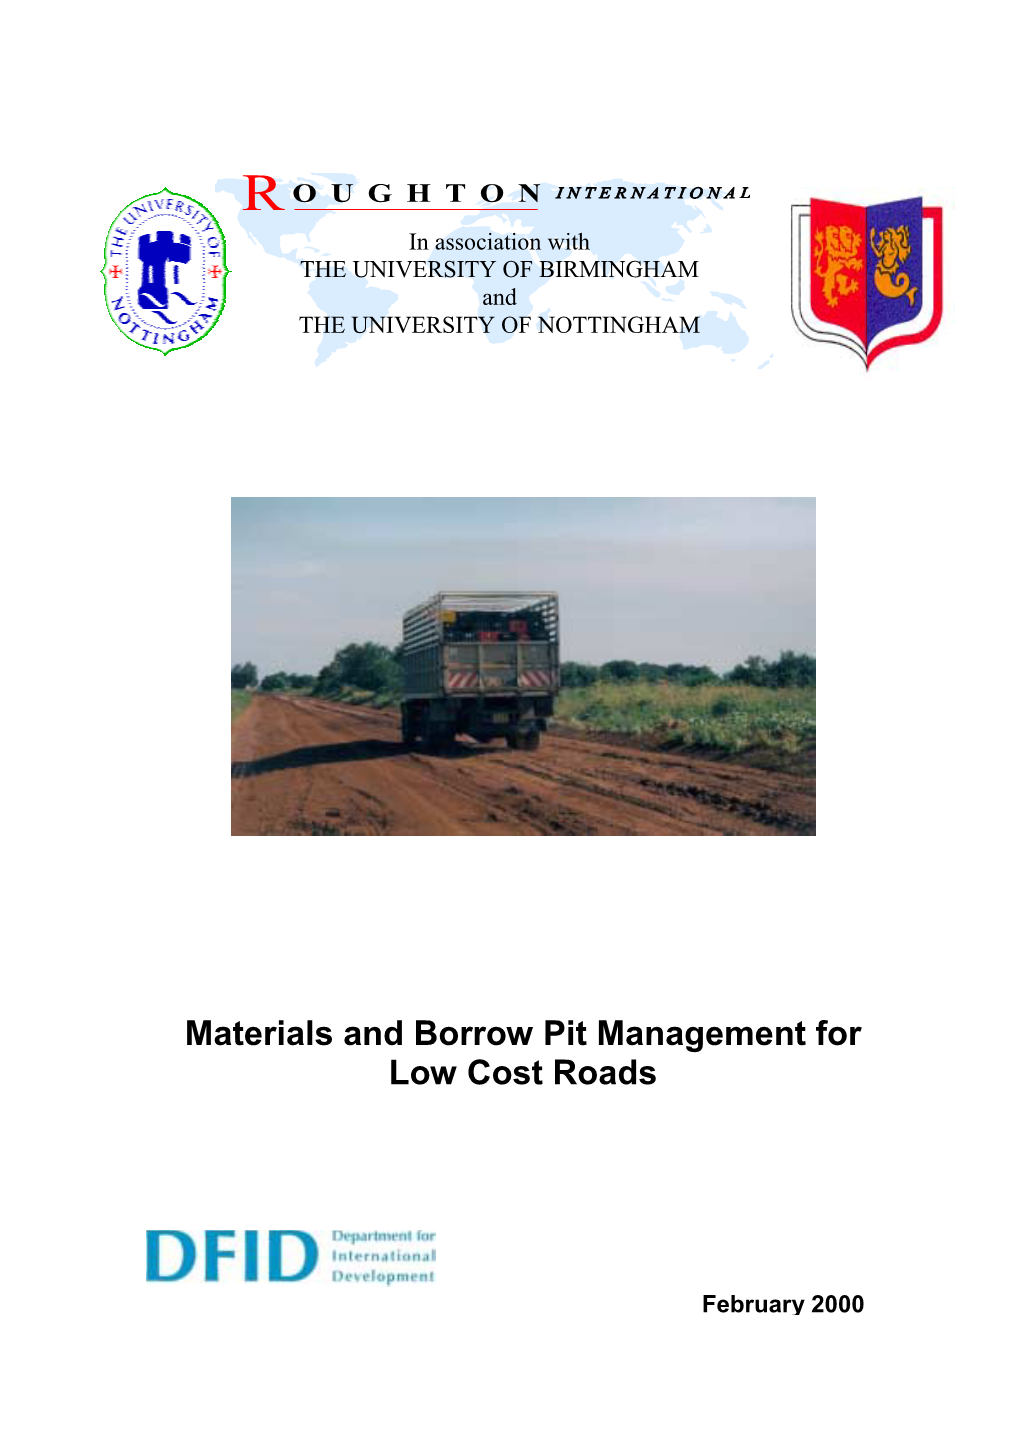 Materials and Borrow Pit Management for Low Cost Roads